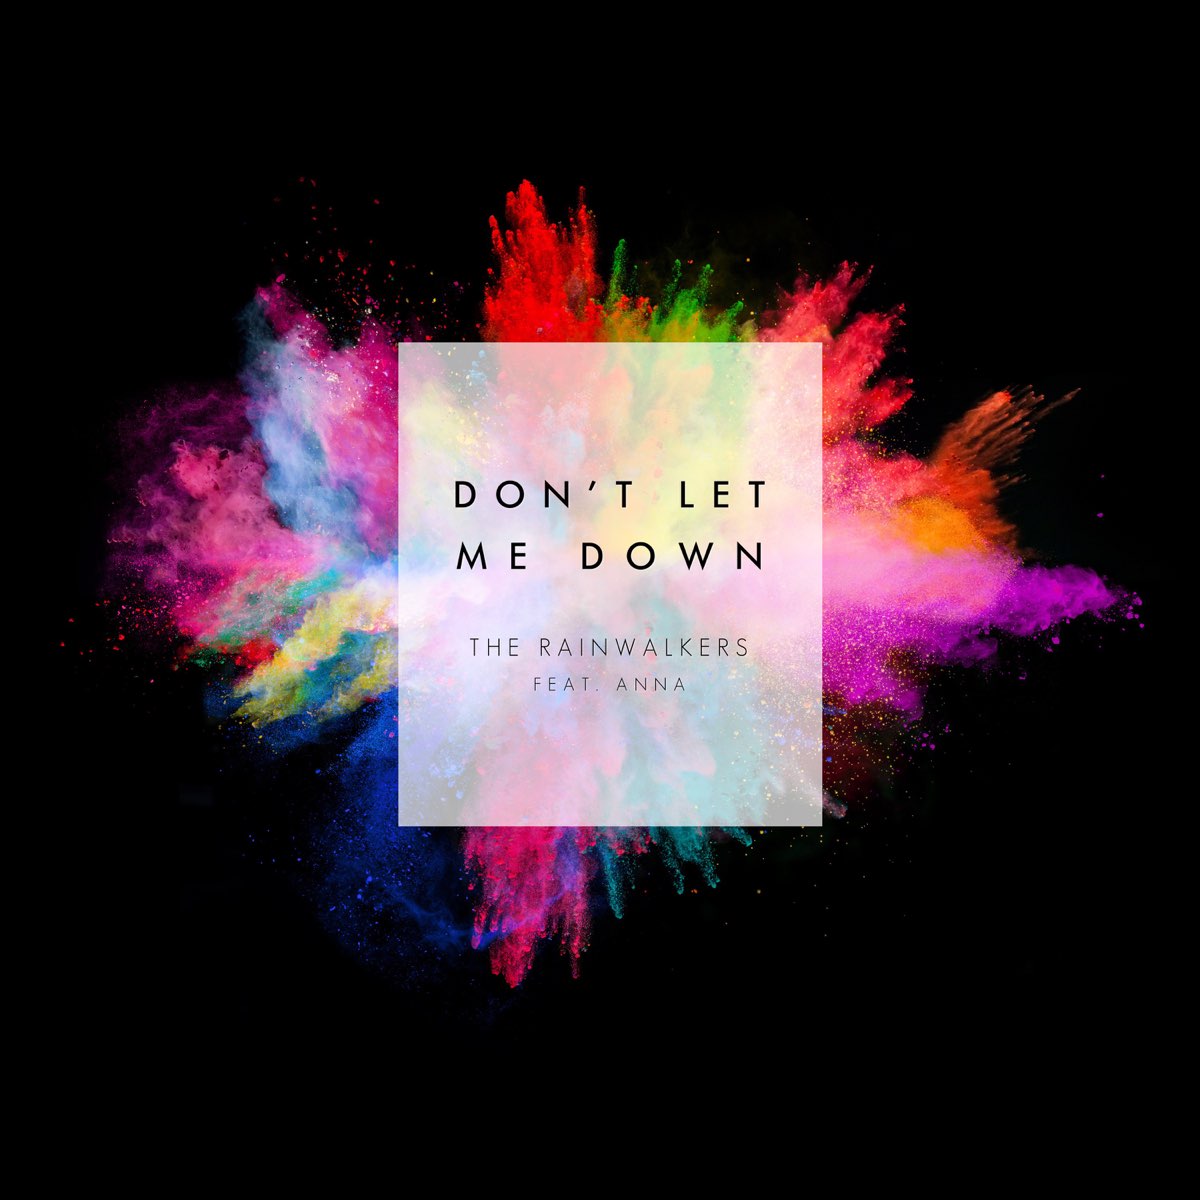 Dont me down. Don`t Let me down. Don't Let me down обложка. The Chainsmokers don't Let me down. Don't Let me down the Chainsmokers обложка.